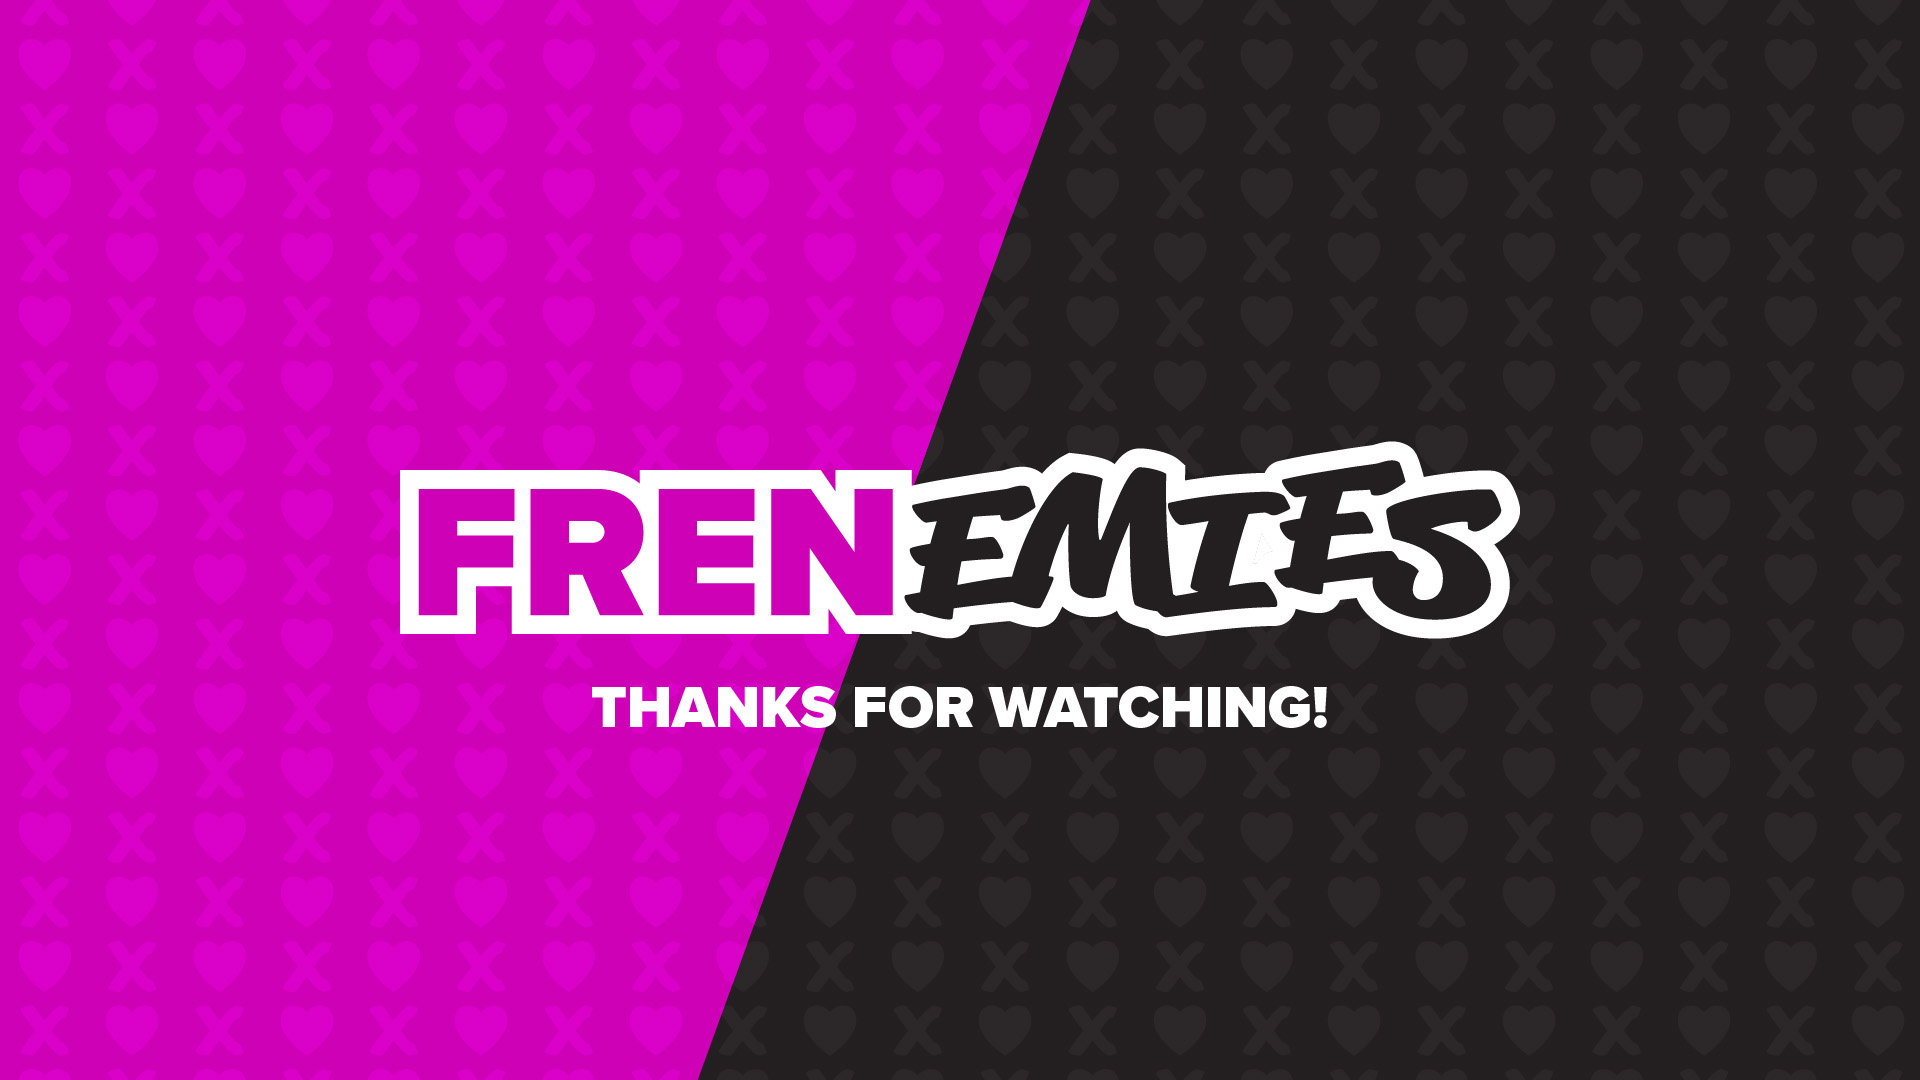 A Thanks for Watching end screen for Frenemies' new branding